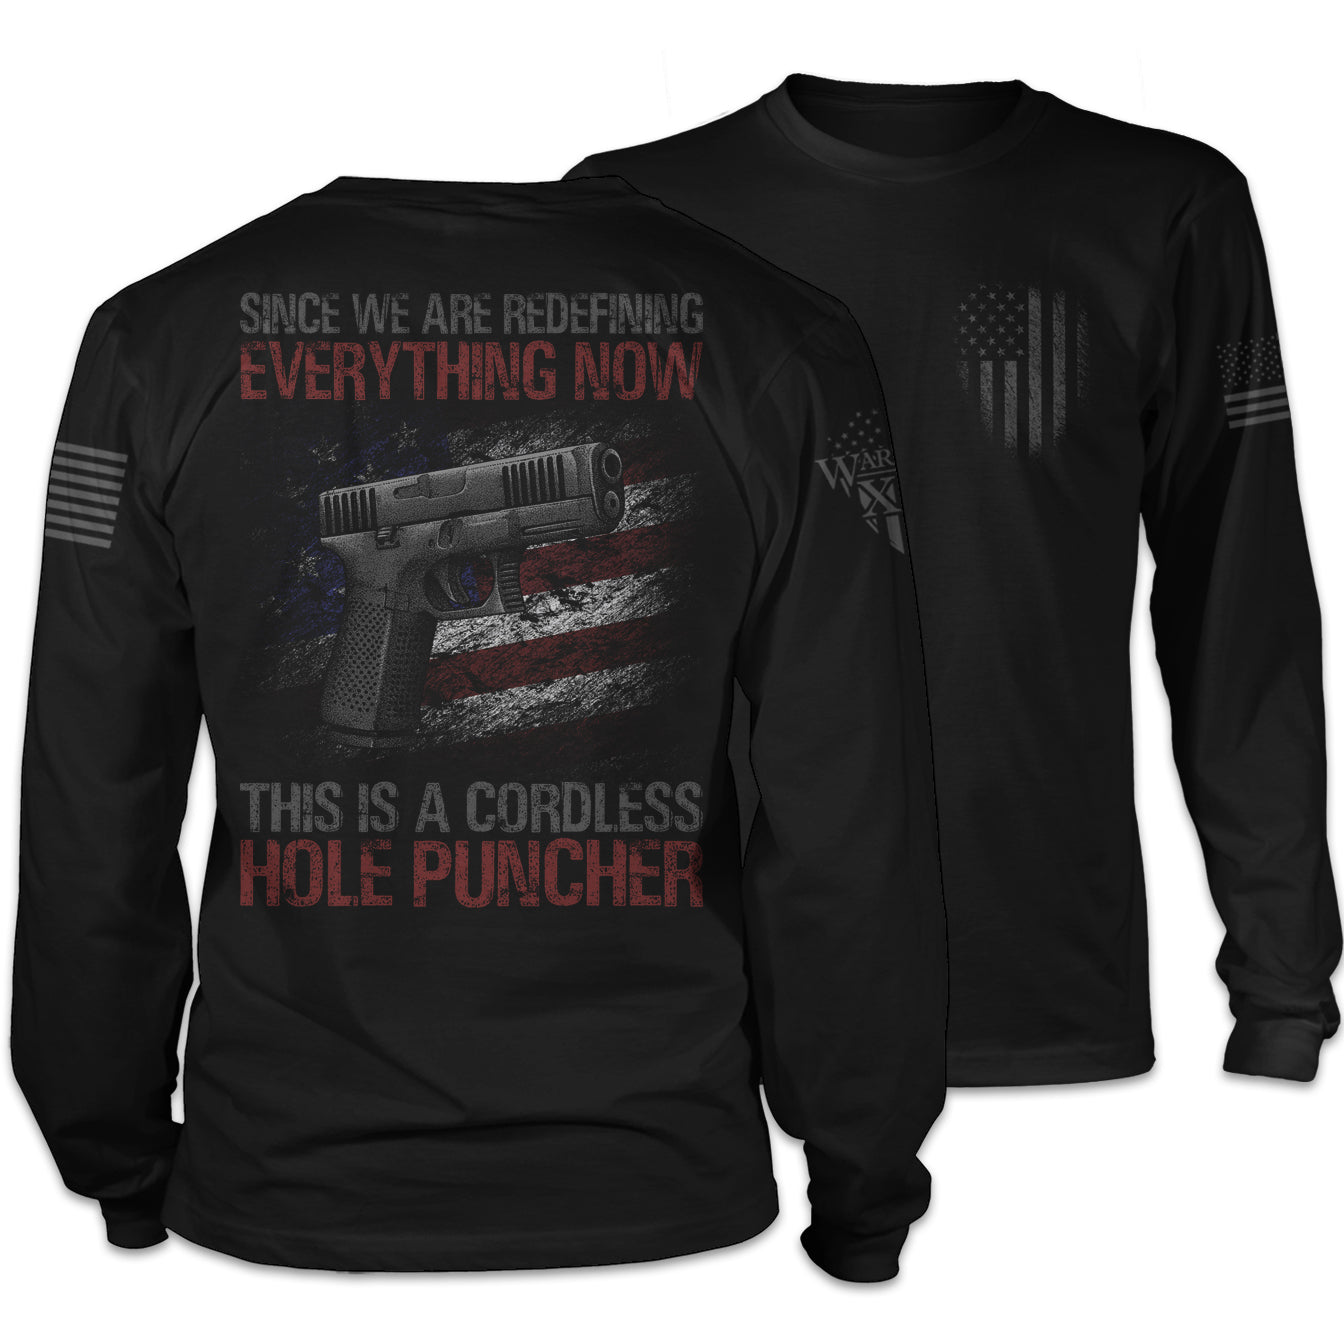 Front & back black long sleeve shirt with the words "Since we are redefining everything now, this is a cordless hole puncher", with a pistol printed on the back of the shirt.on the back of the shirt.